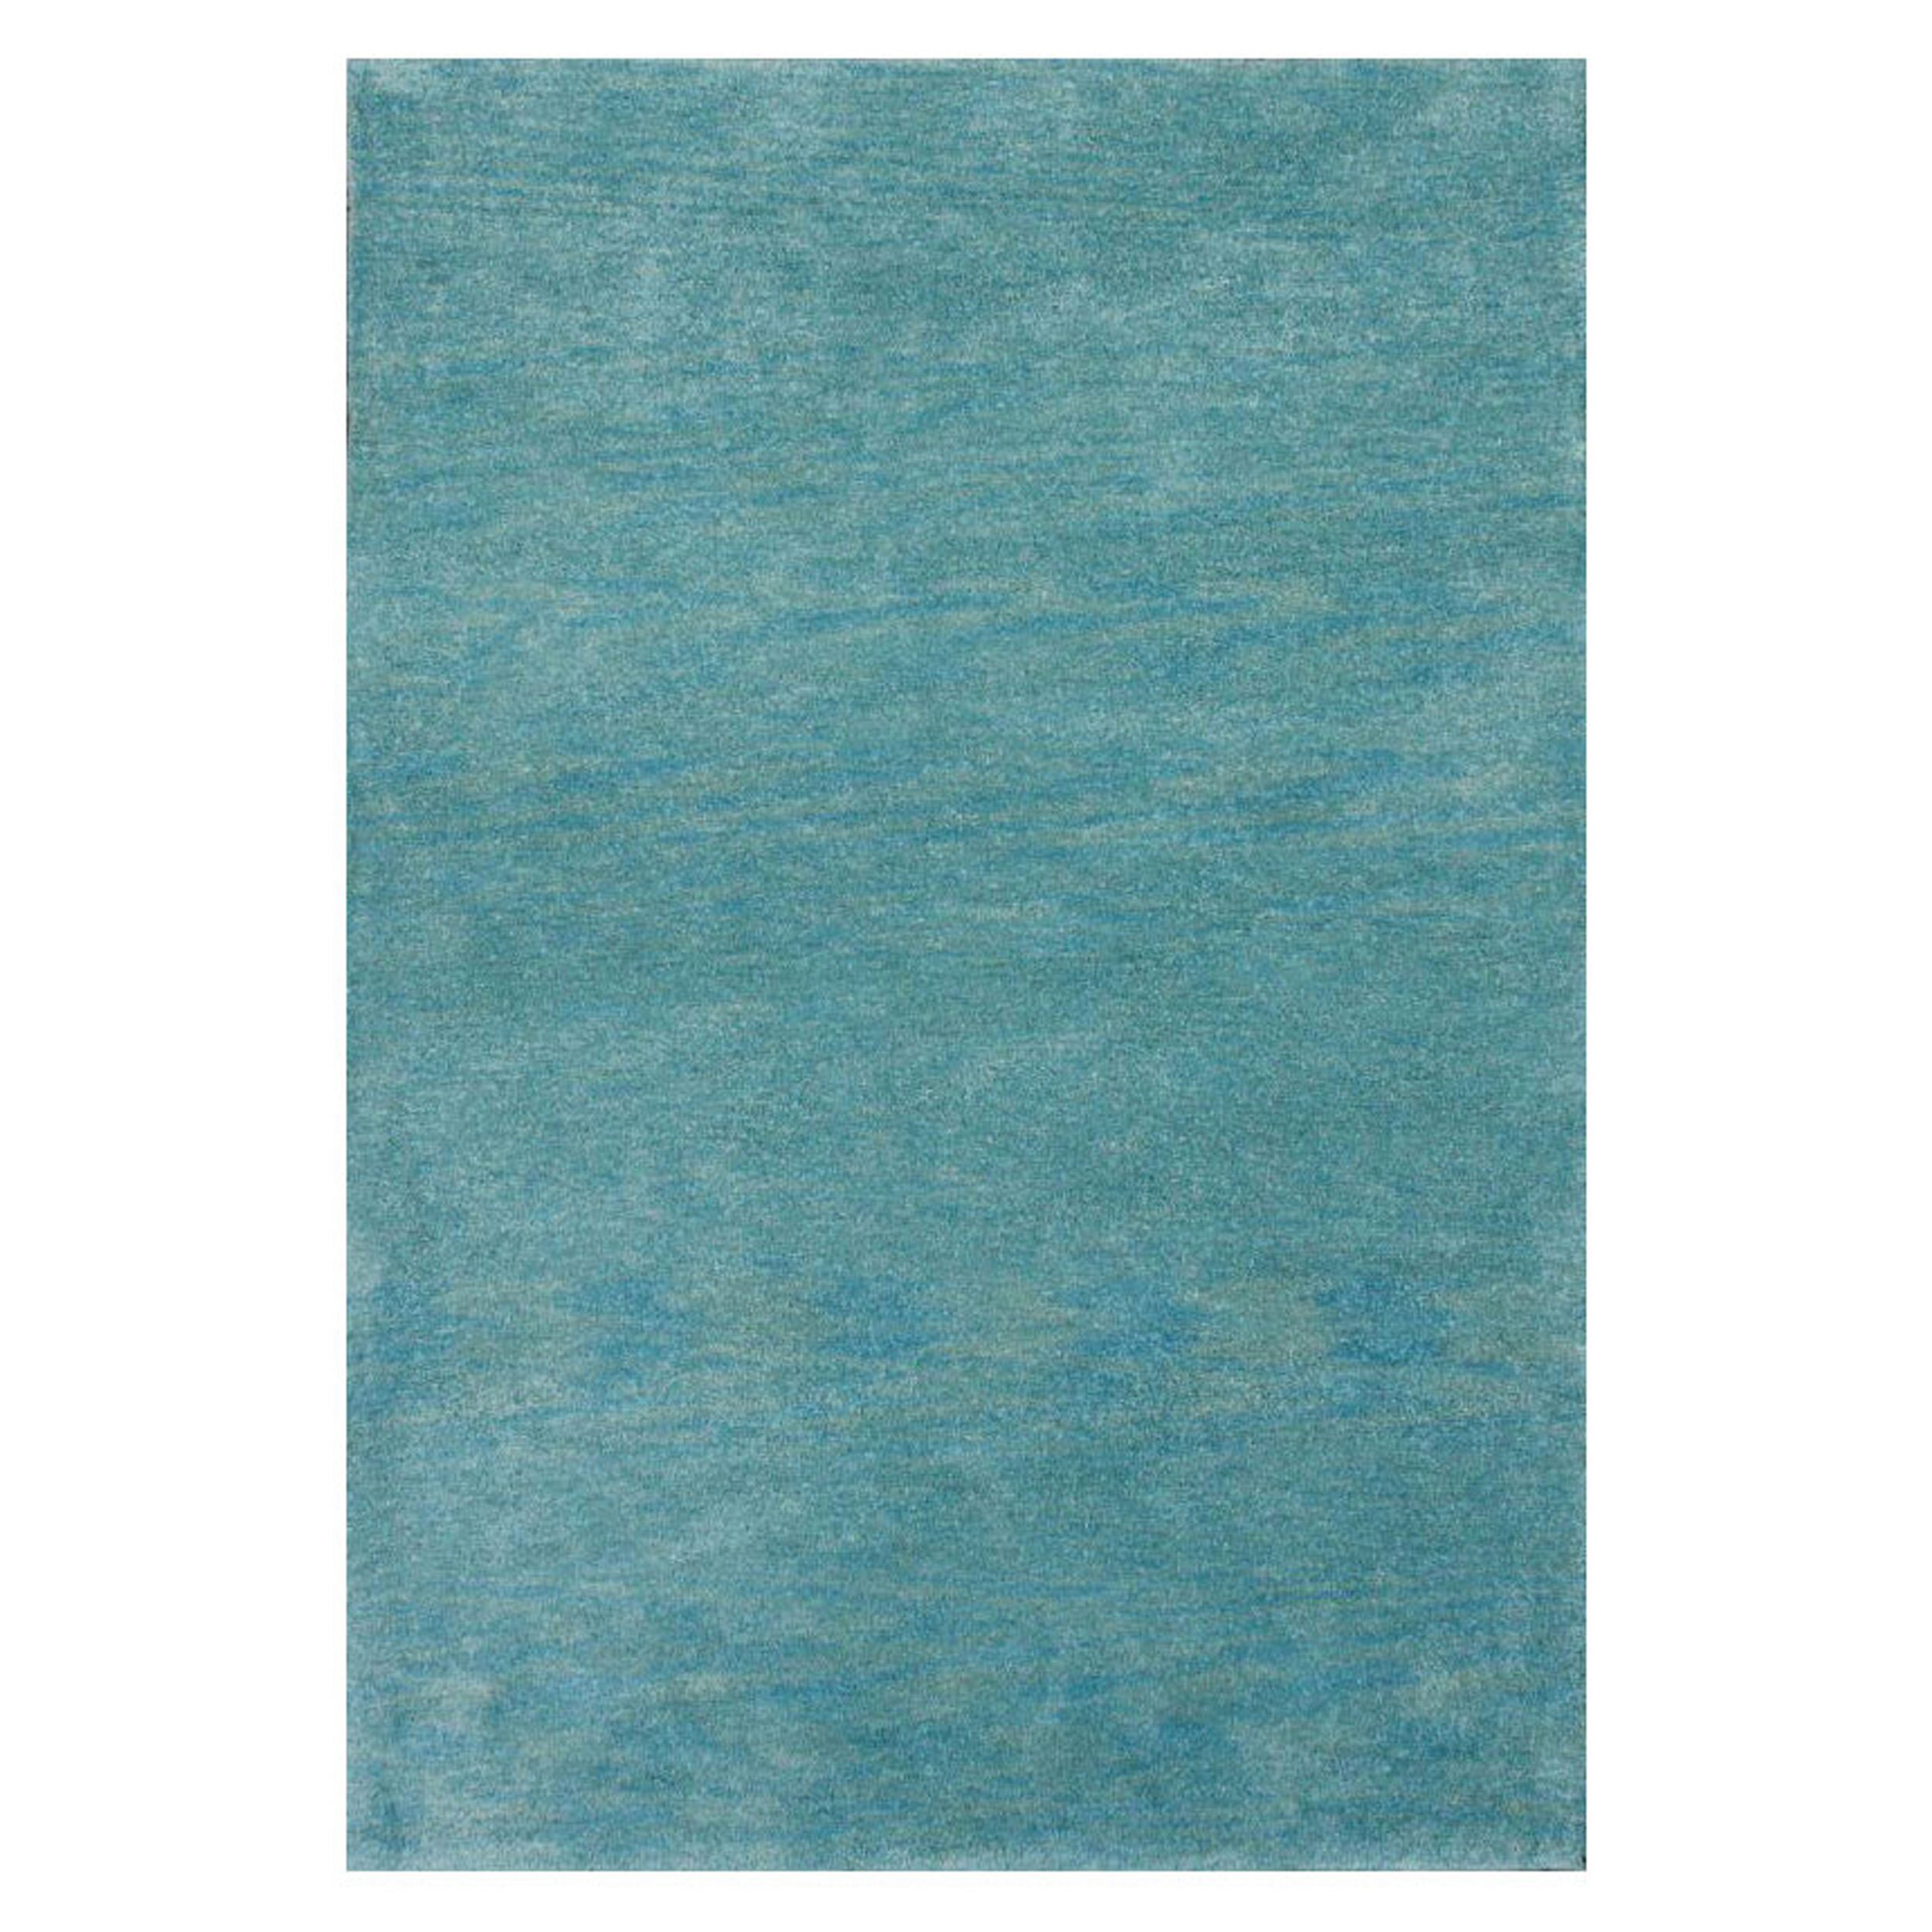 Nuloom Handmade Solid Light Blue Rug (5 X 8) (BluePattern SolidTip We recommend the use of a non skid pad to keep the rug in place on smooth surfaces.All rug sizes are approximate. Due to the difference of monitor colors, some rug colors may vary slight